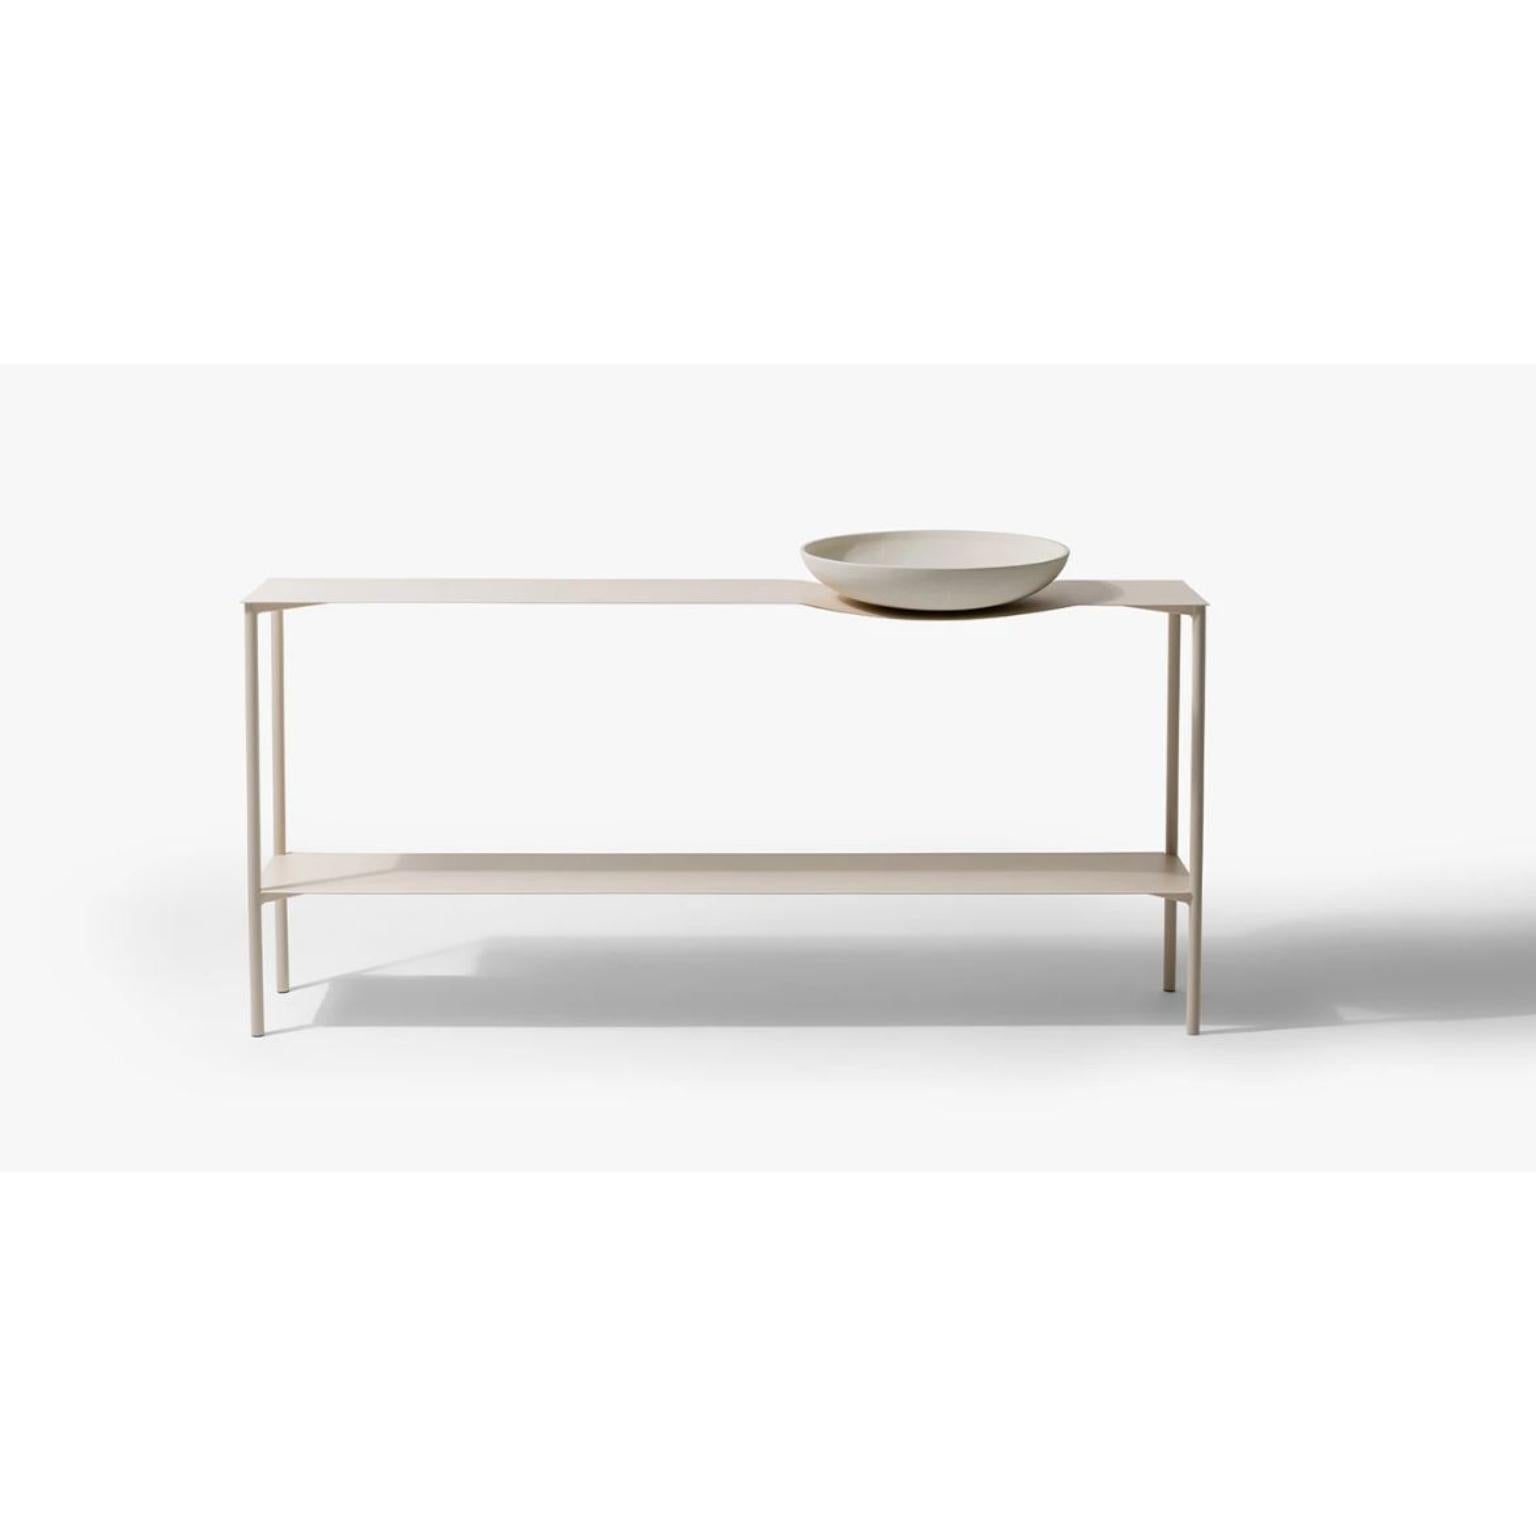 Bowl Console Table by Wentz
Dimensions: D 45 x W 165 x H 80 cm
Materials: Steel, Ceramic, Stainless Steel.
Coffee table with steel structure and top with textured electrostatic painting. Ceramic “Bowl” fixed to the top with a machined stainless